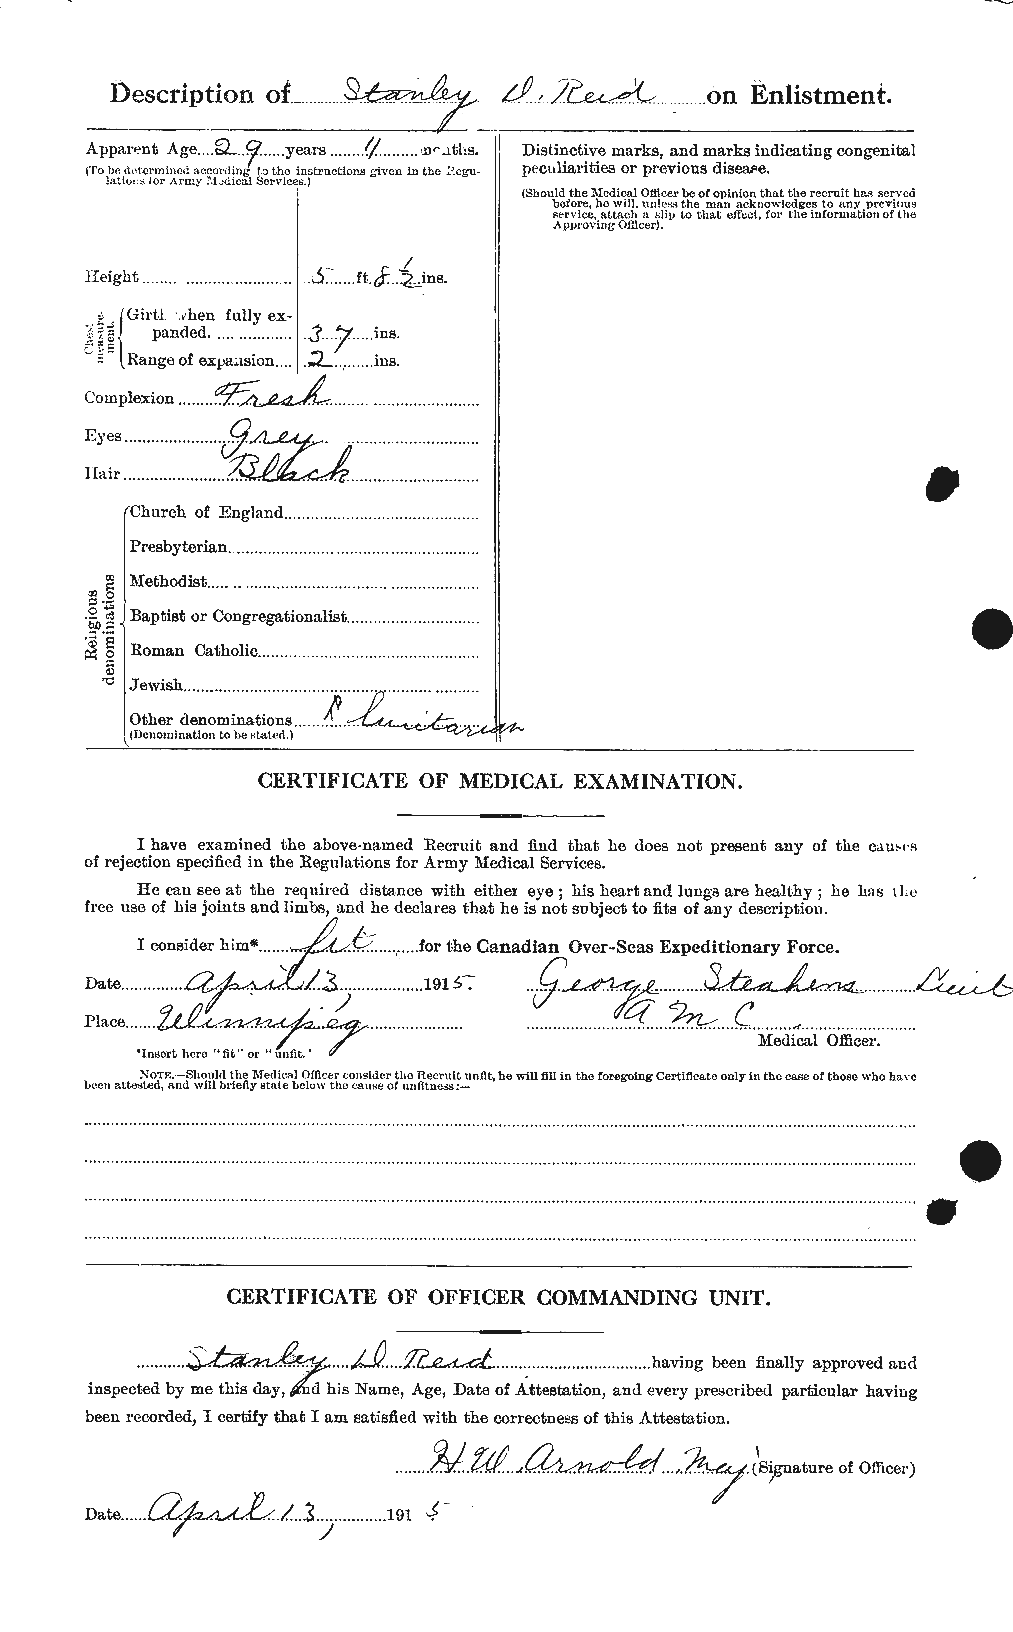 Personnel Records of the First World War - CEF 601967b